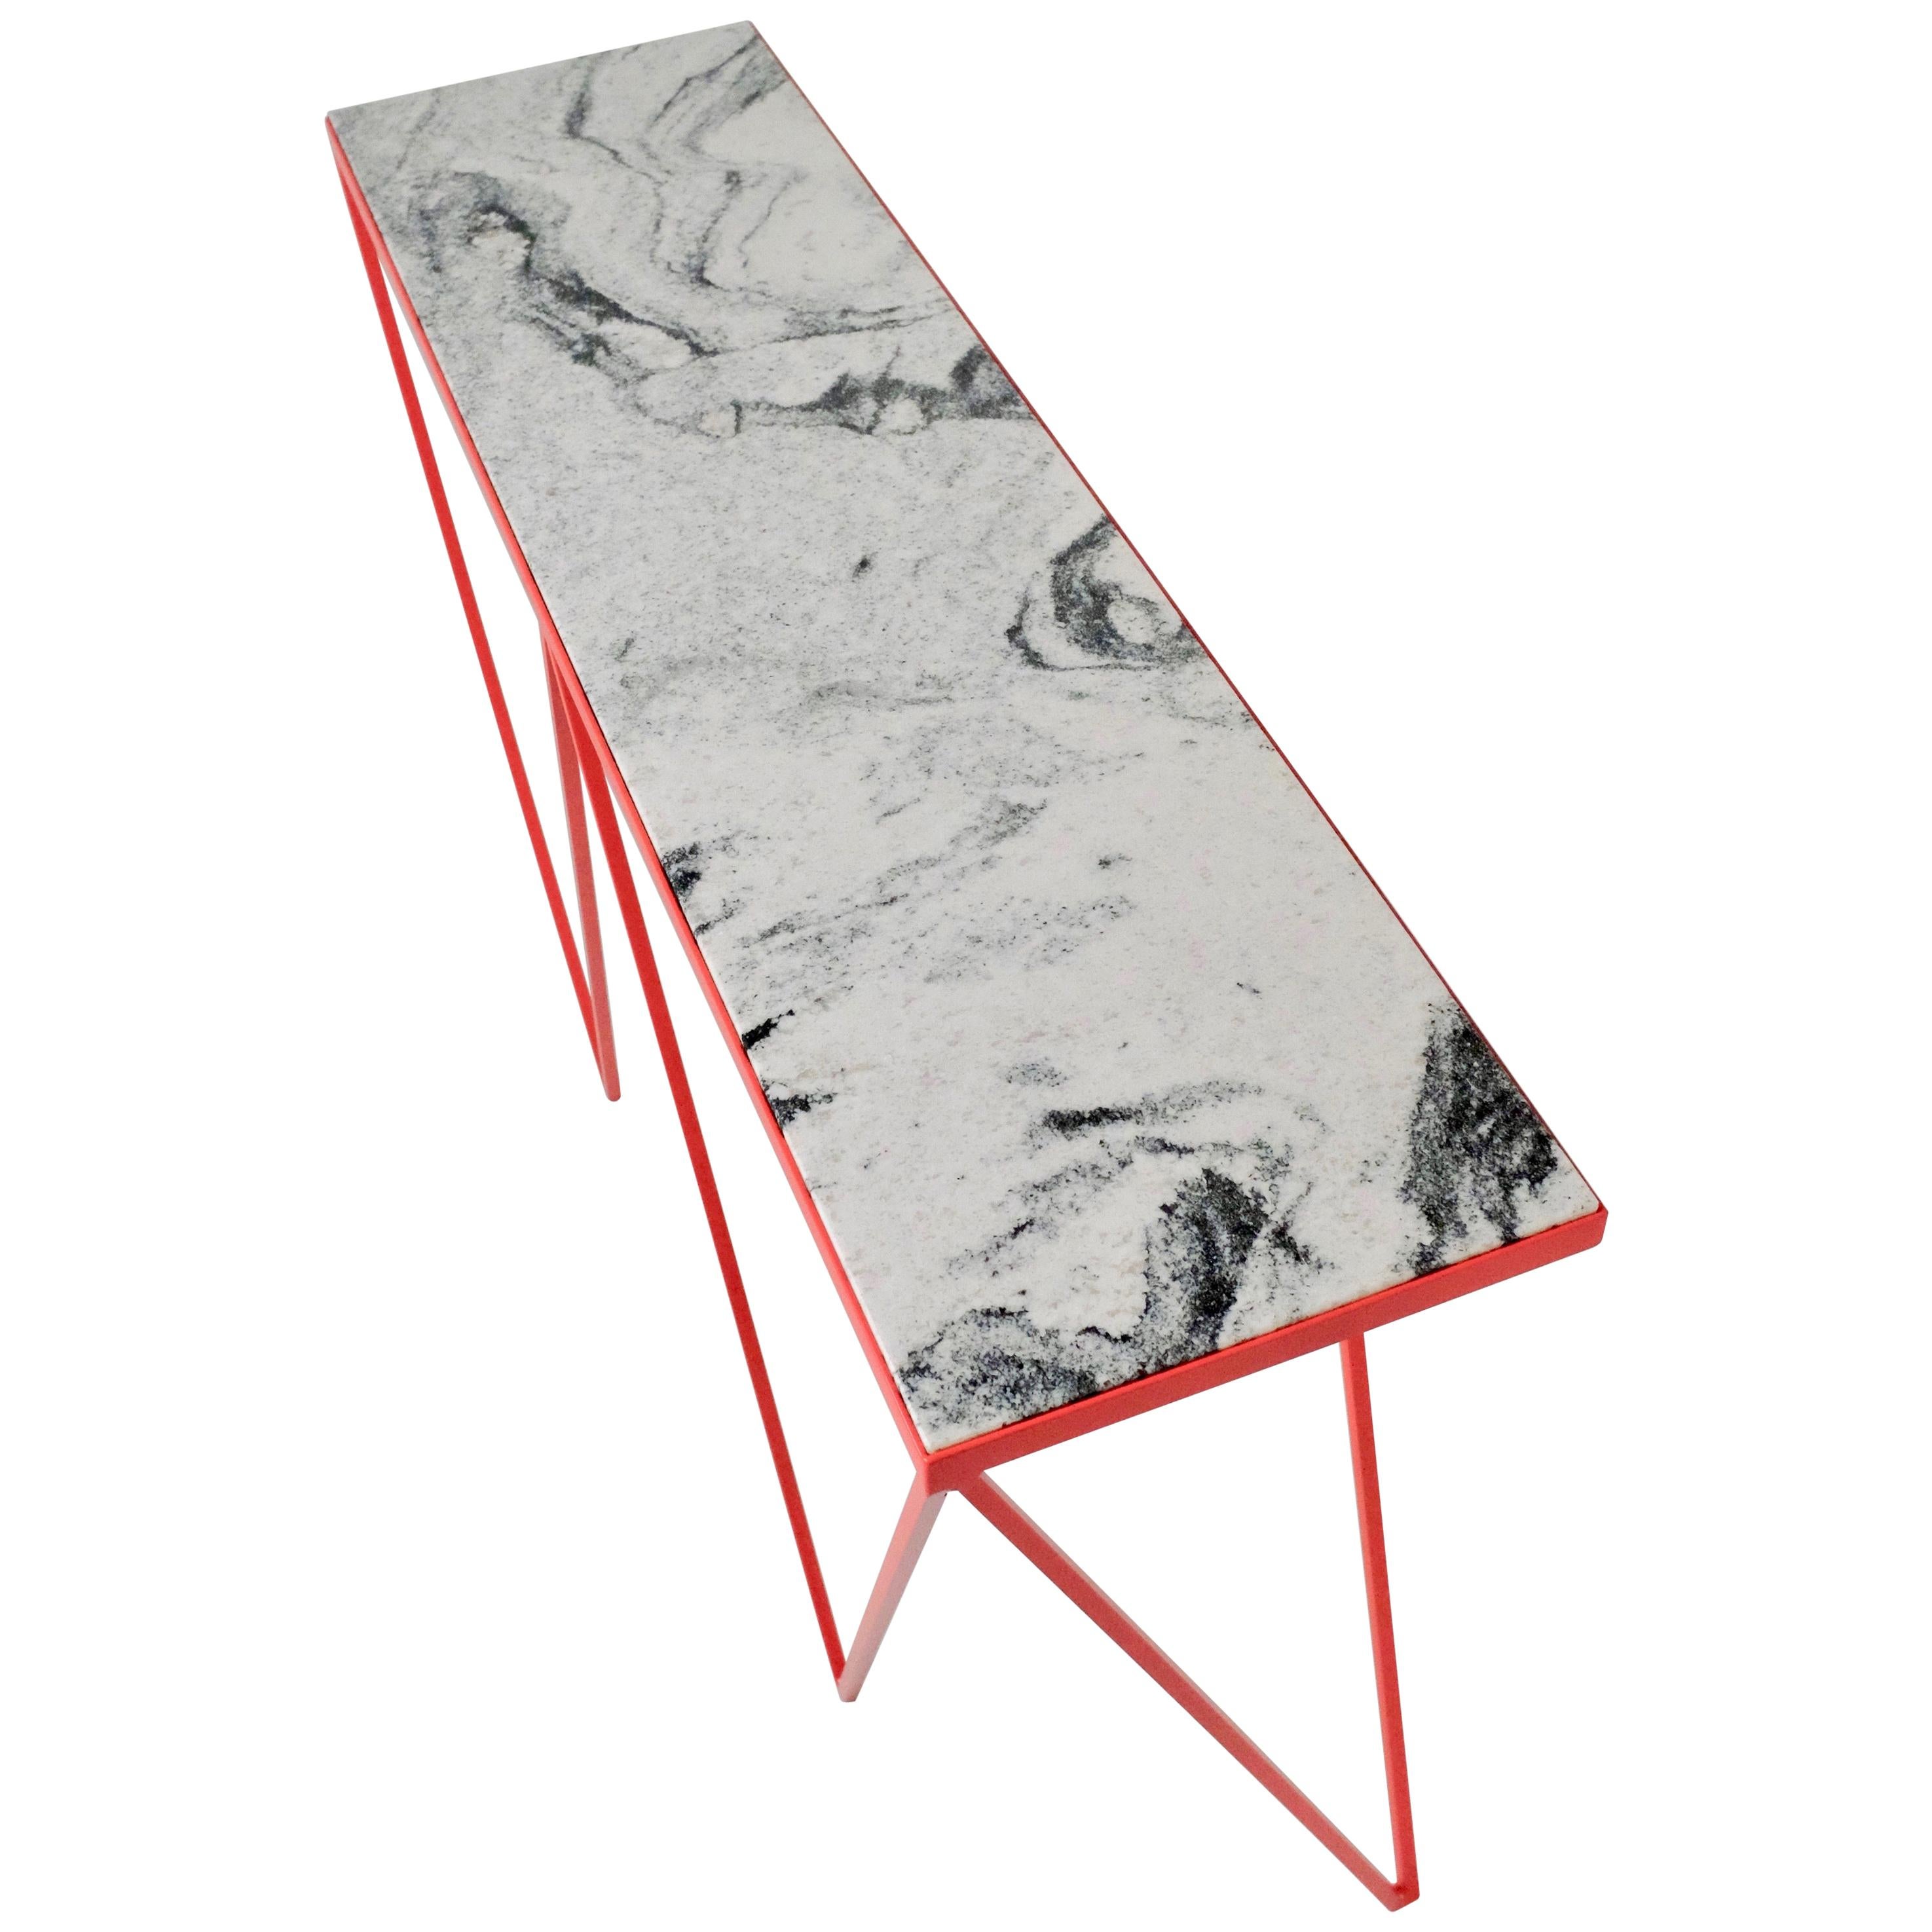 Giraffe Console Table with Granite Top - Made in England, Customizable